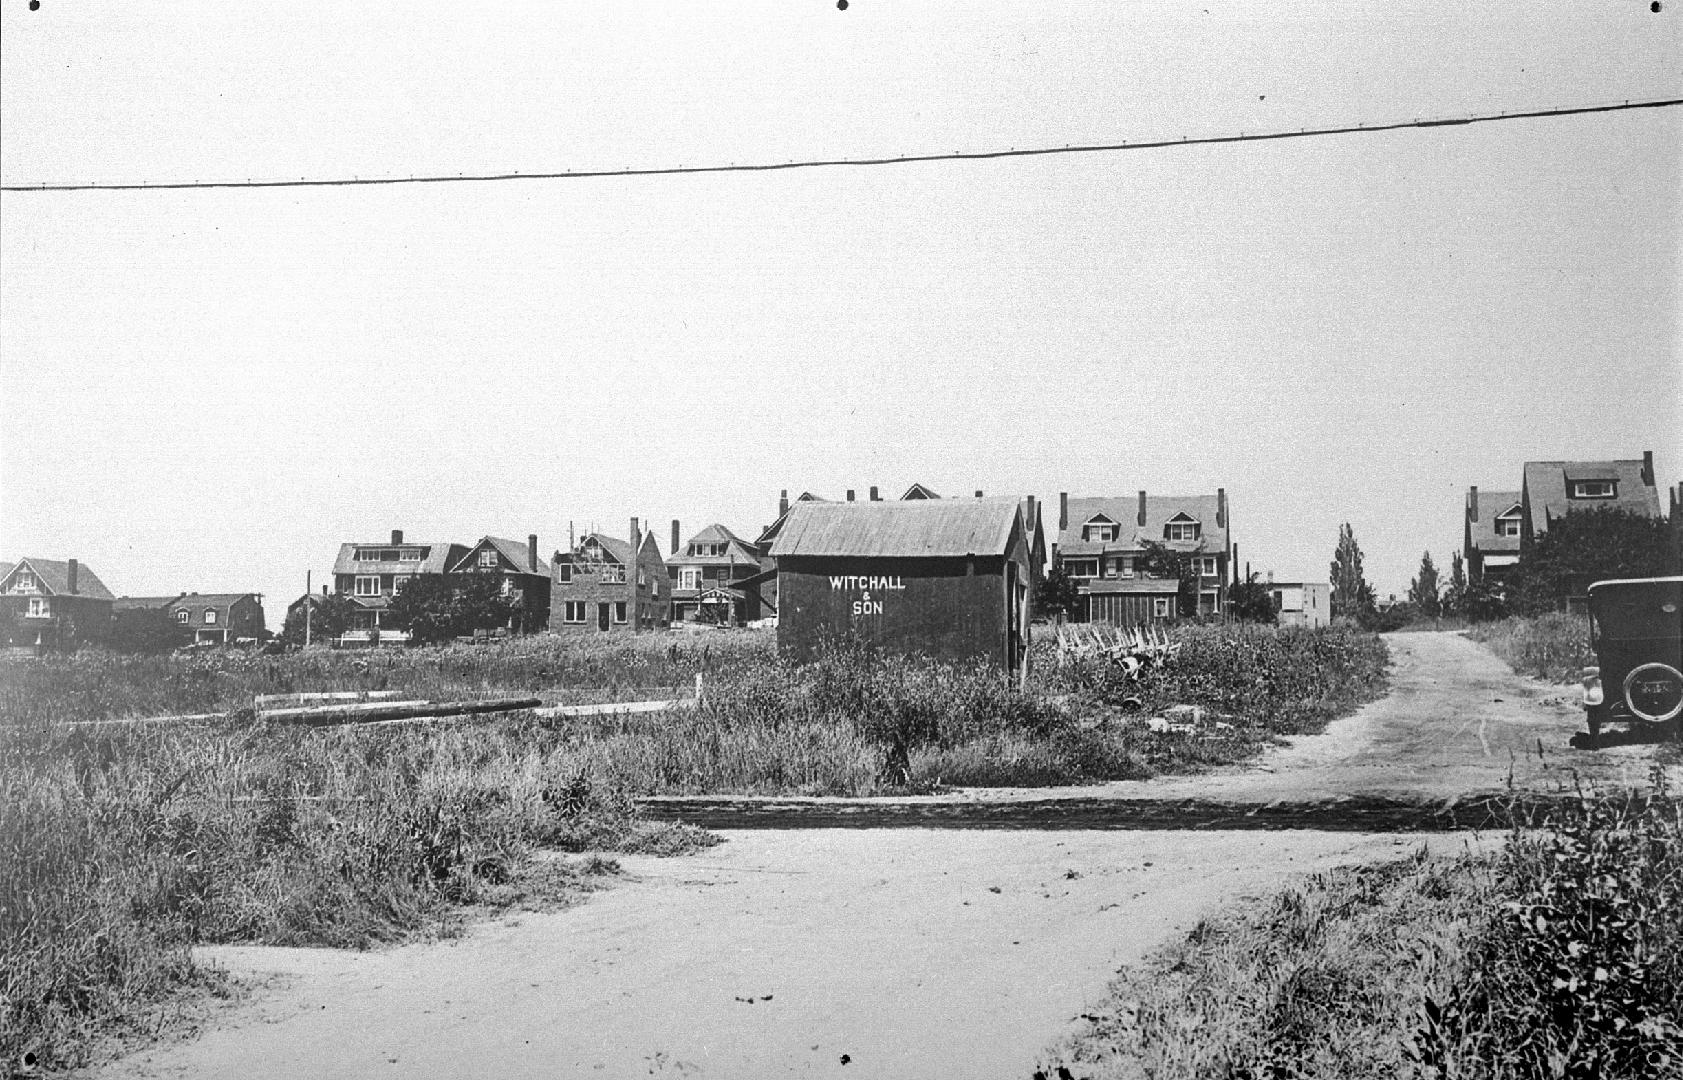 Duplex Ave., looking north from about Eglinton Ave. Image shows a big meadow with some resident ...